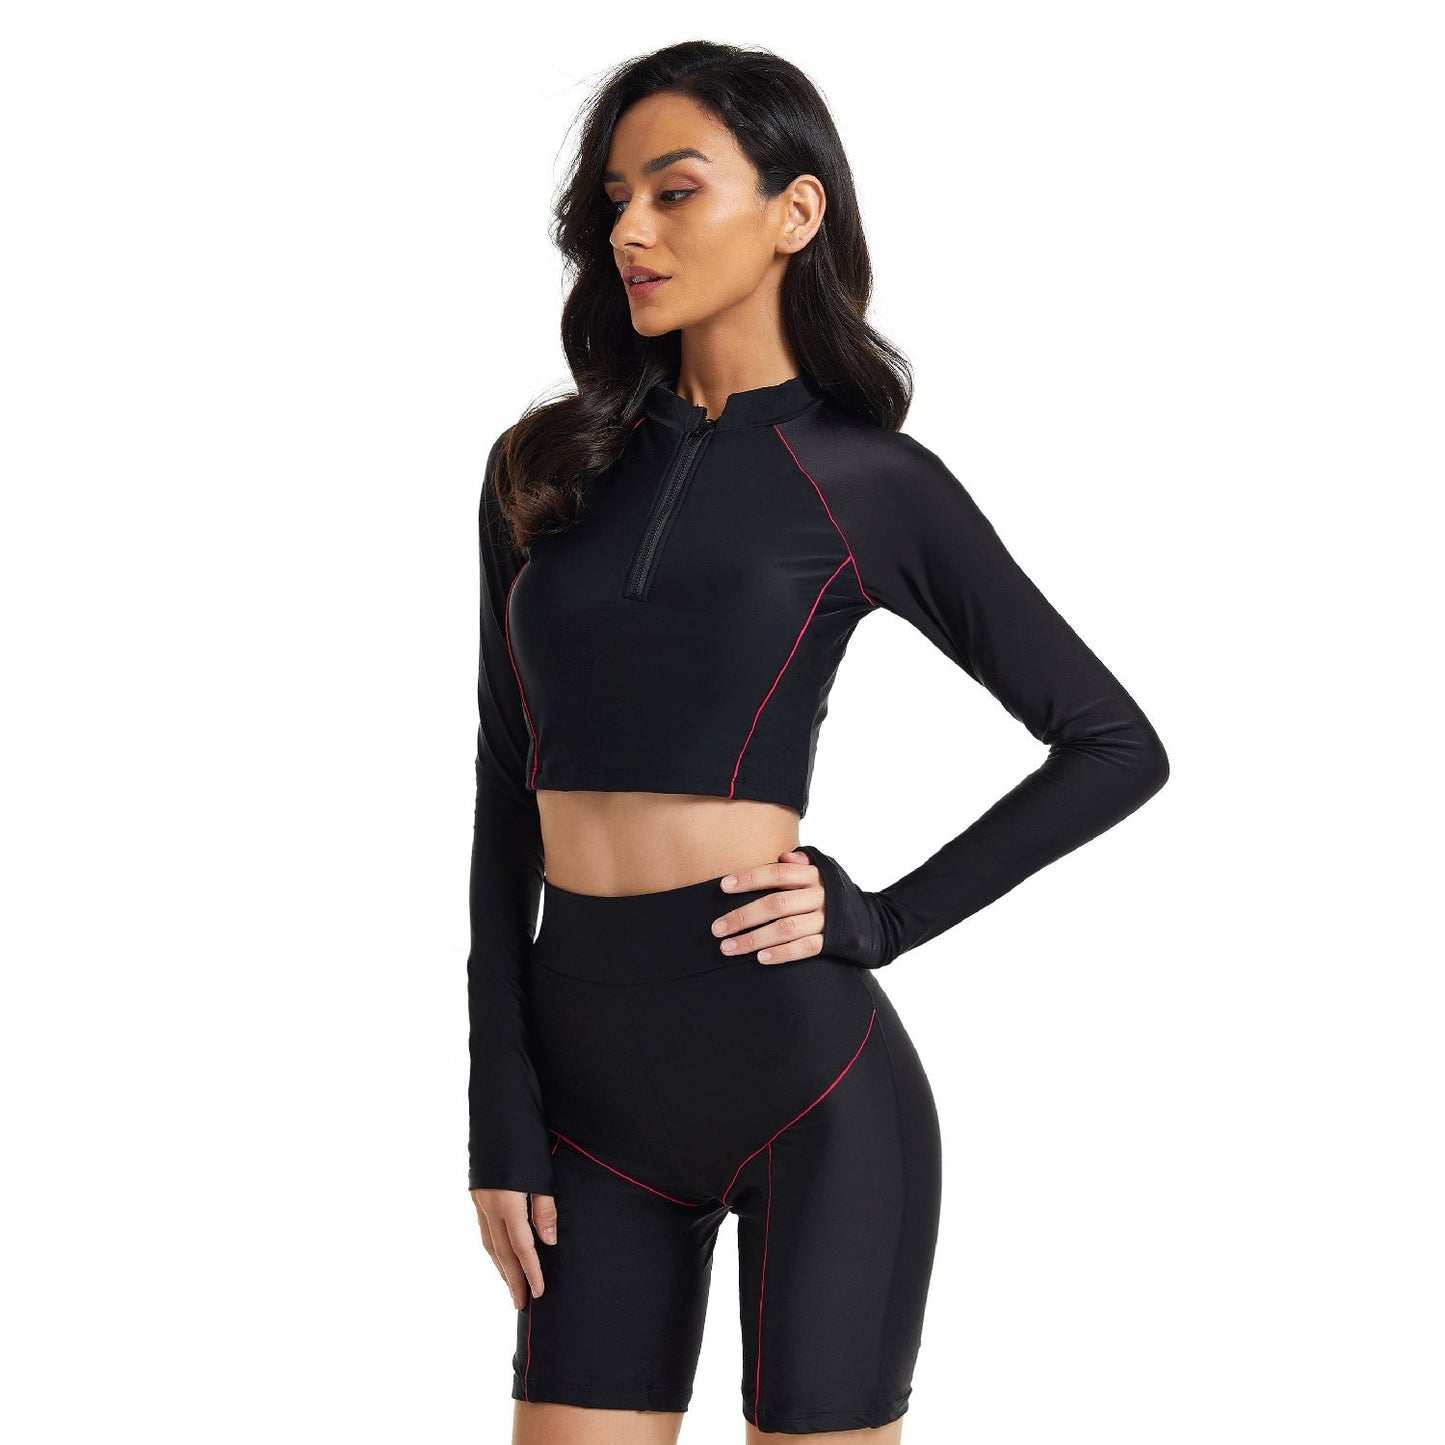 Black Zipper Surfing Wetsuits for Women-Swimwear-Free Shipping at meselling99